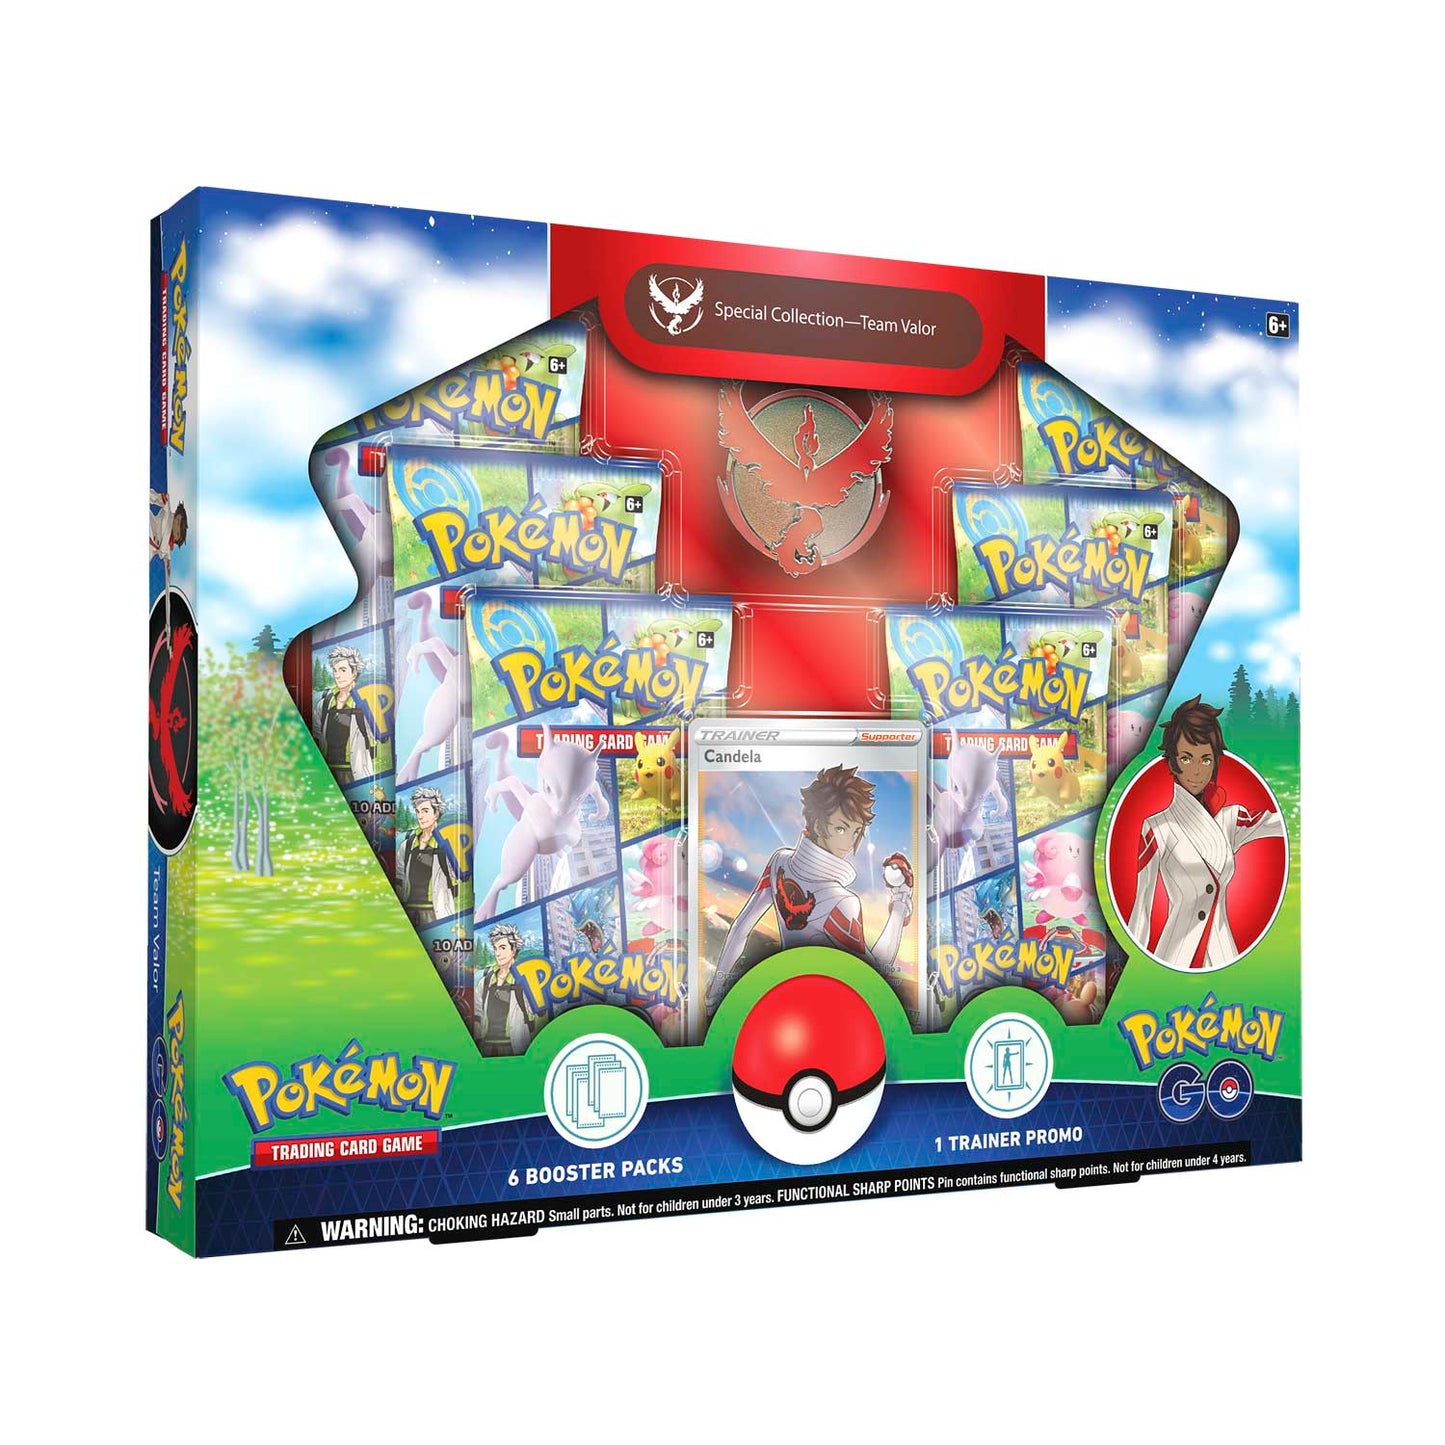 Team Valor Special Collection is shown, featuring the Candela full art trainer card.